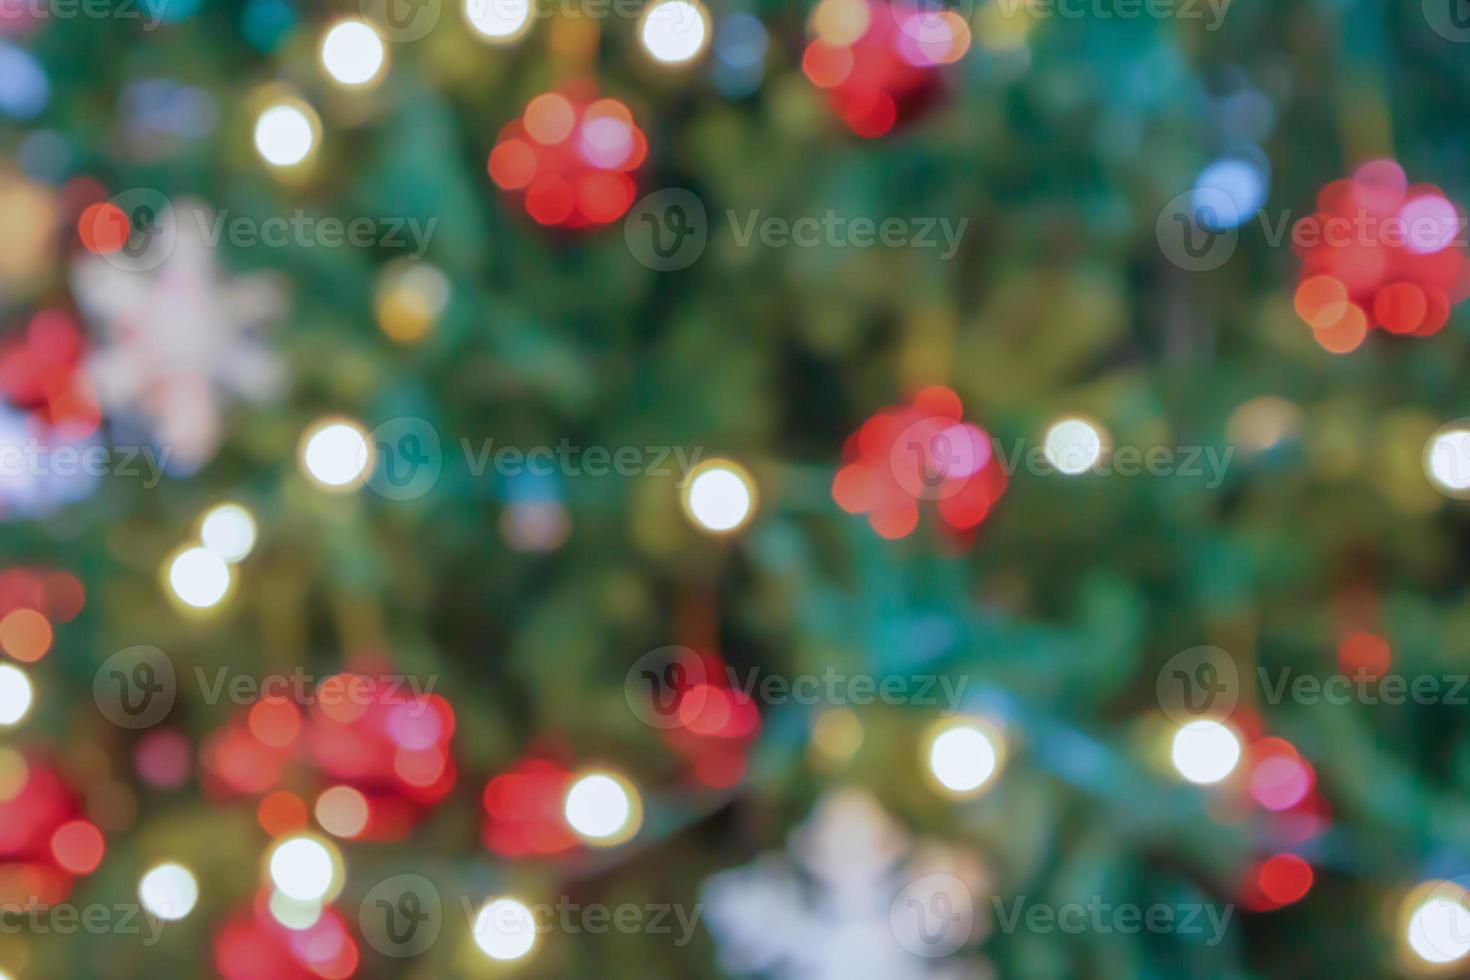 Abstract blurred christmas tree with bokeh light background photo